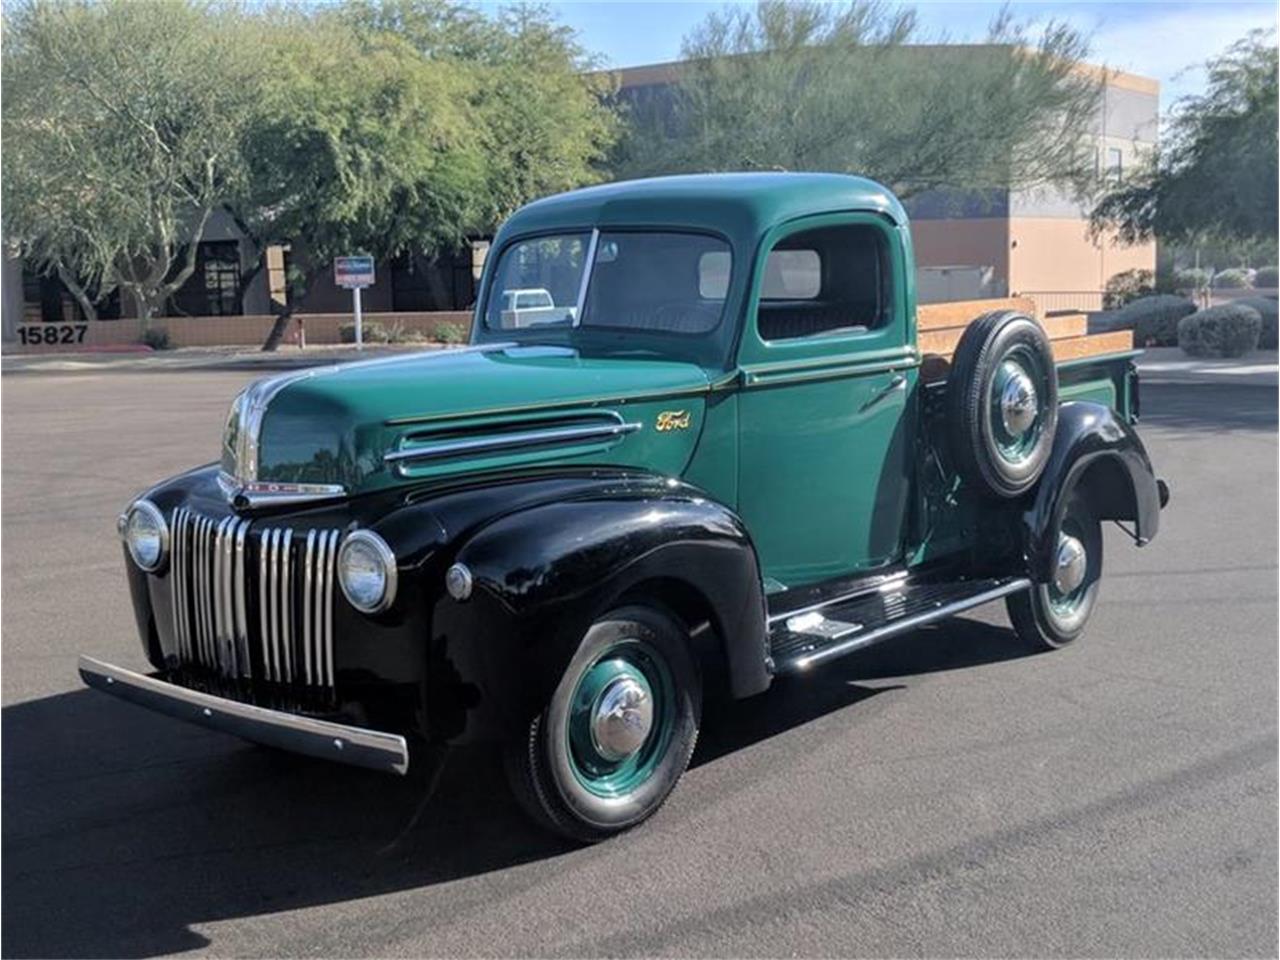 1946 ford f100 for sale classiccars com cc 1046869 1946 ford f100 for sale classiccars